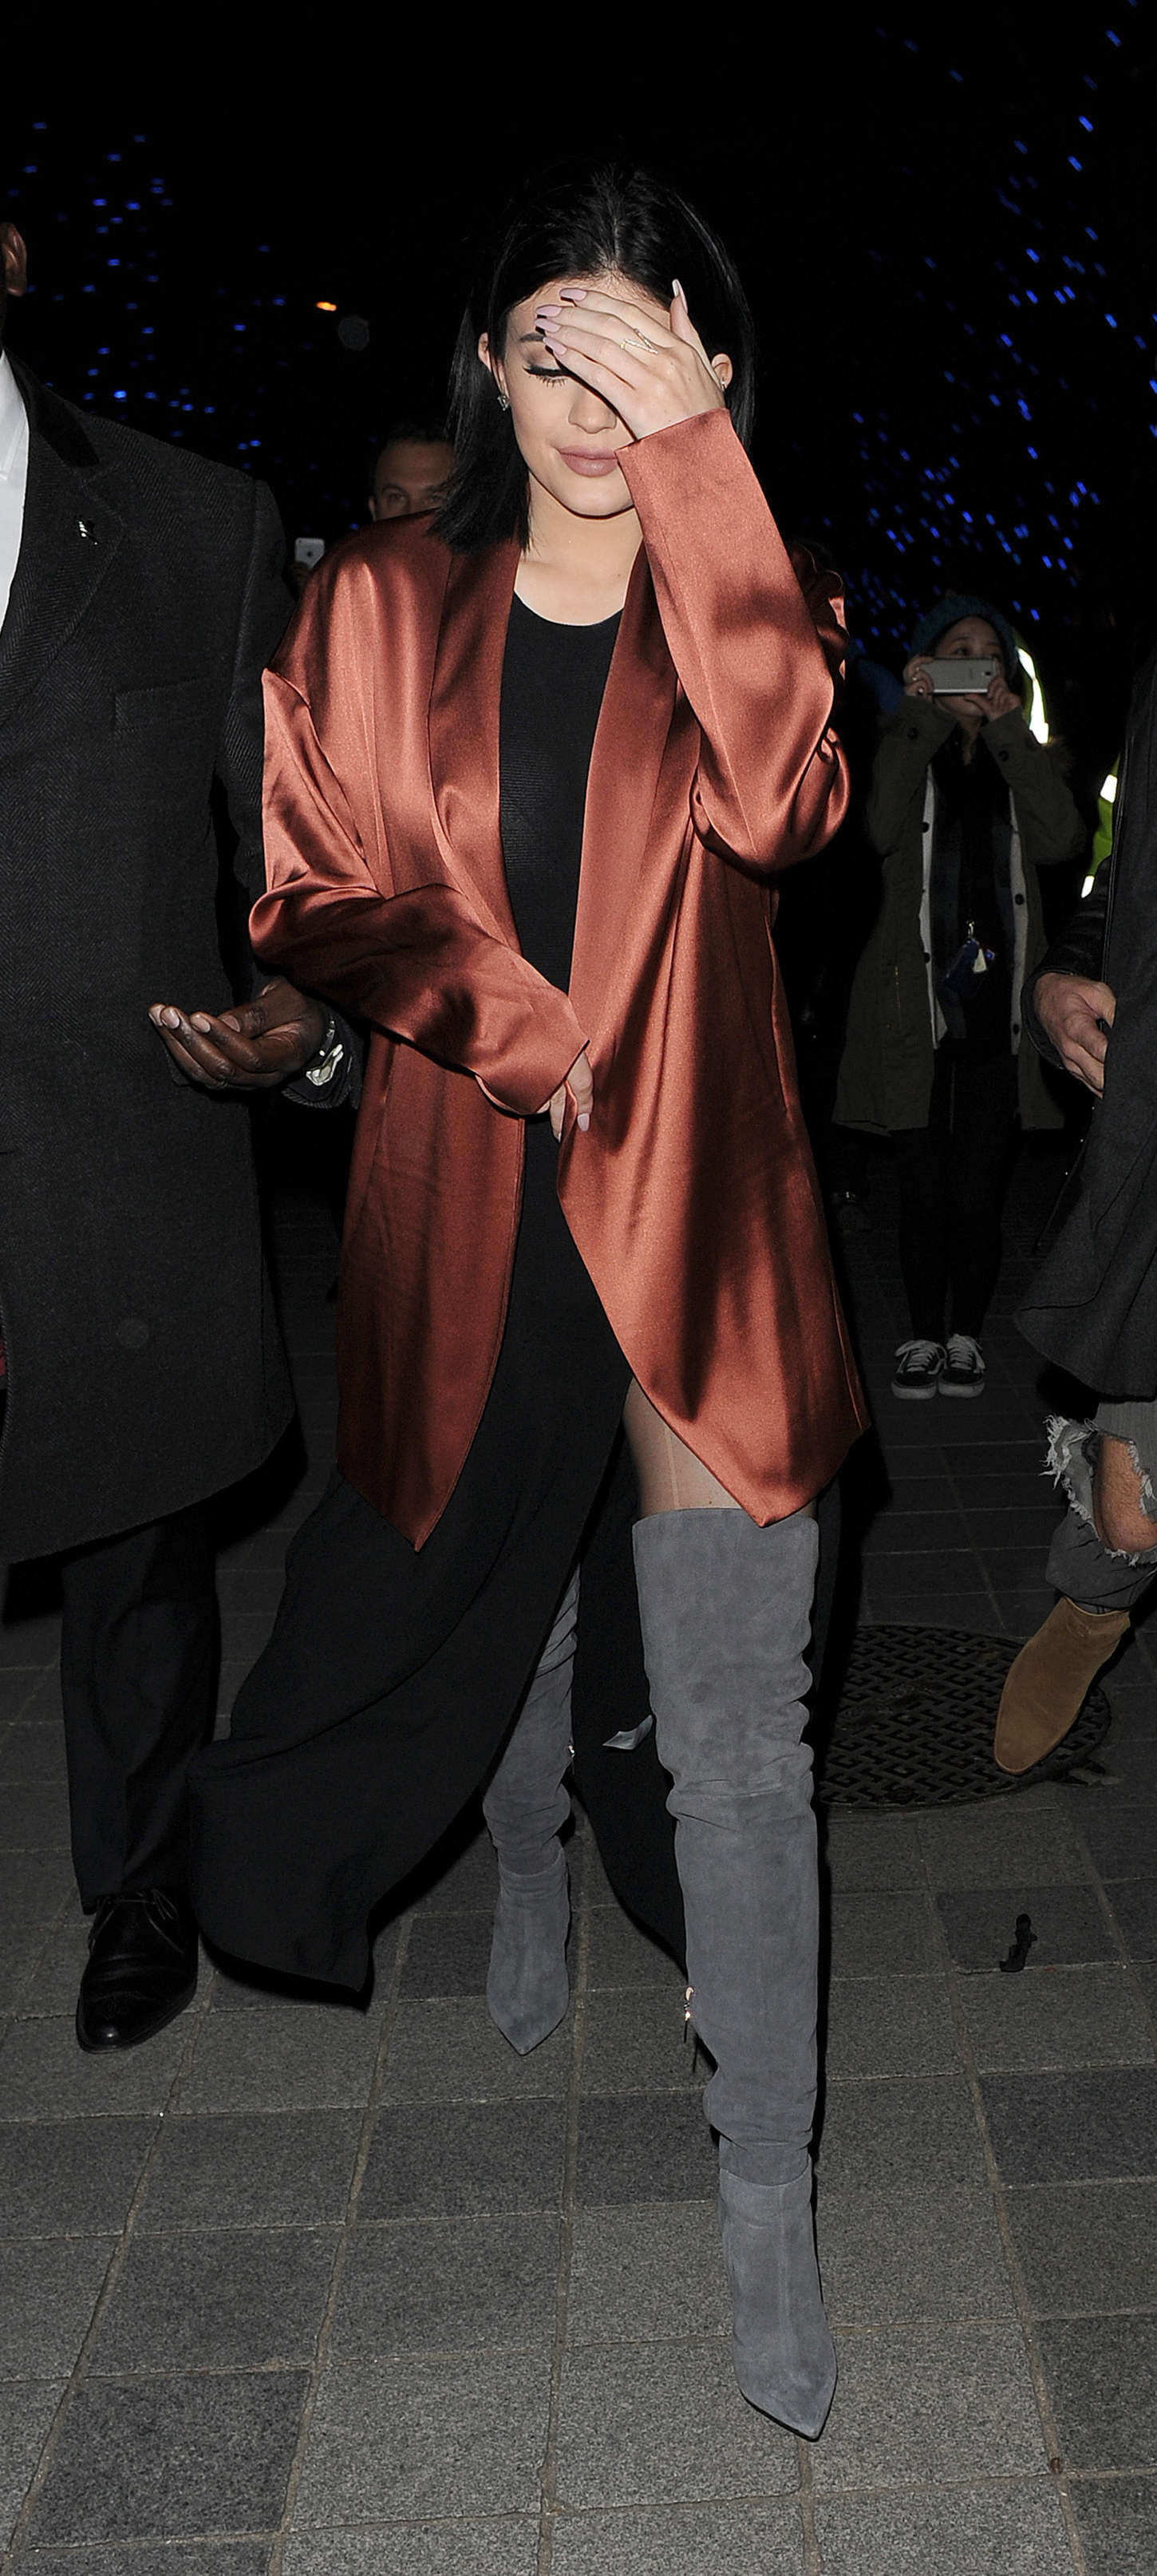 Kylie-Jenner-Night-Out-in-London--13.jpg